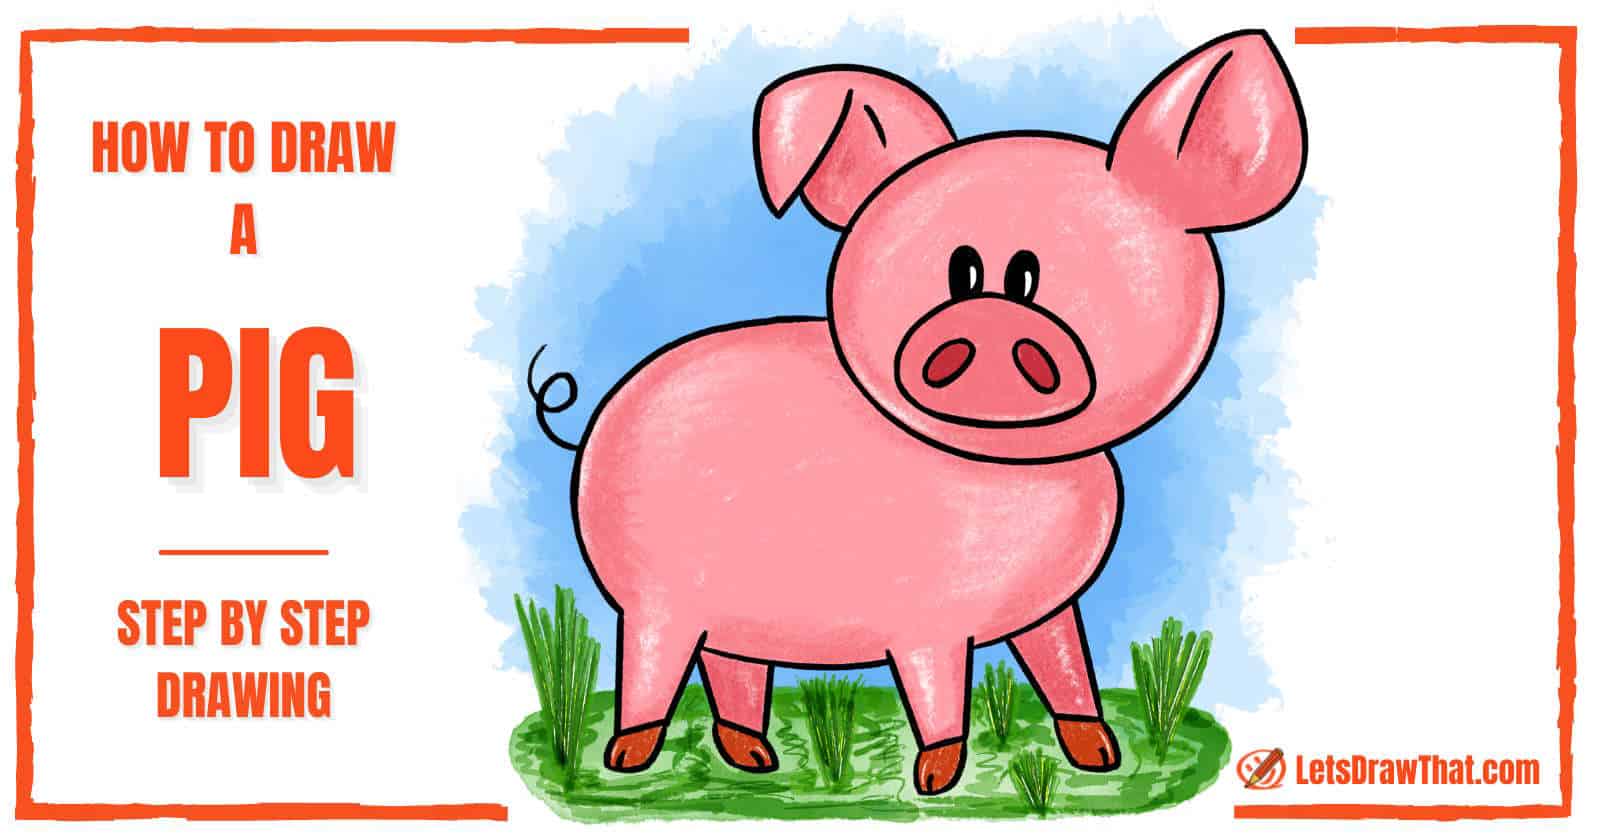 How to Draw Farm Animals Archives - Let's Draw That!